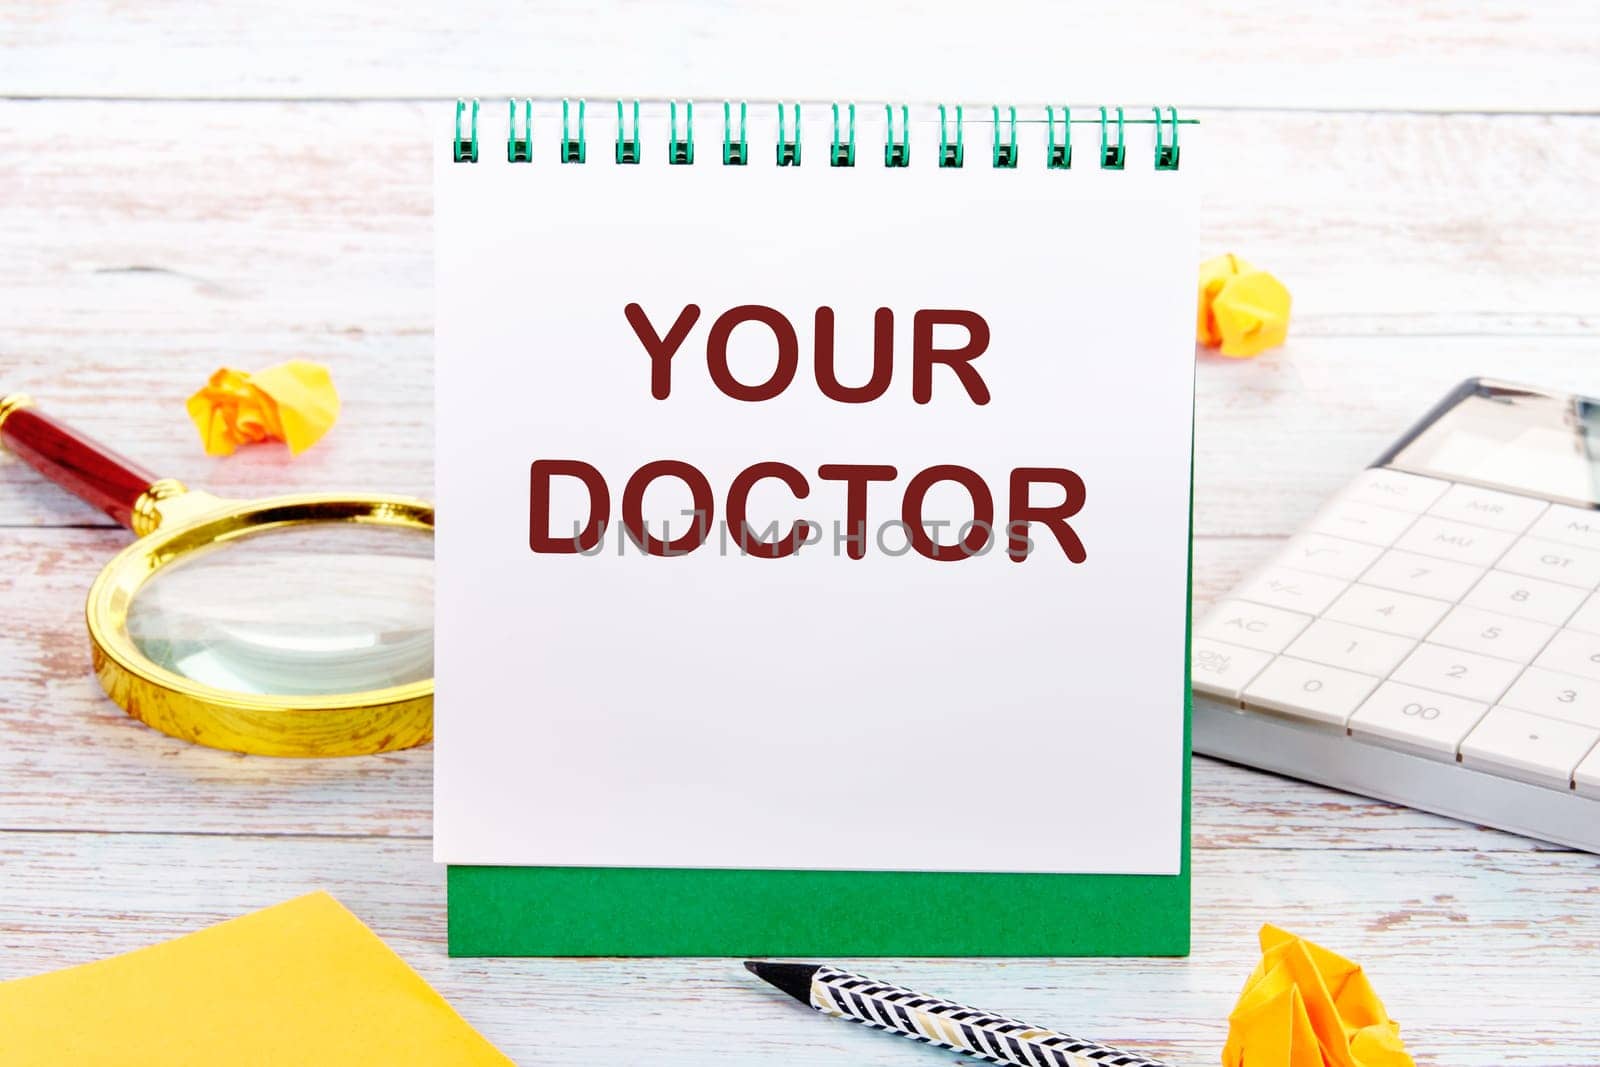 YOUR DOCTOR text on the white sheet of the notebook is next to a magnifying glass, calculator, pencil, stickers